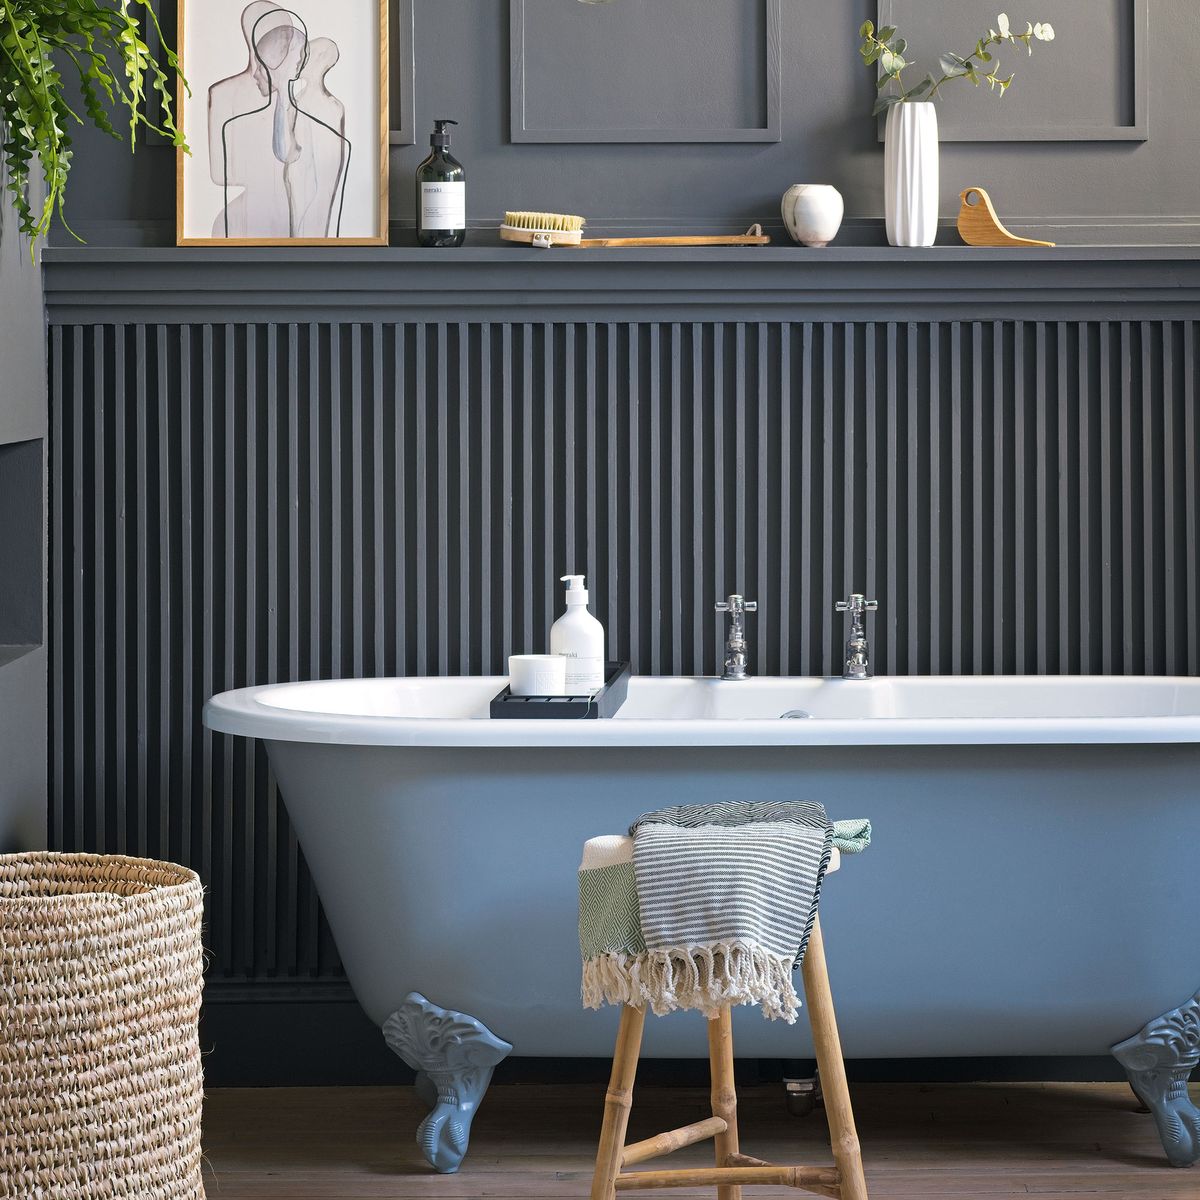 I’m a decor editor and these are my style secrets for achieving a spa bathroom